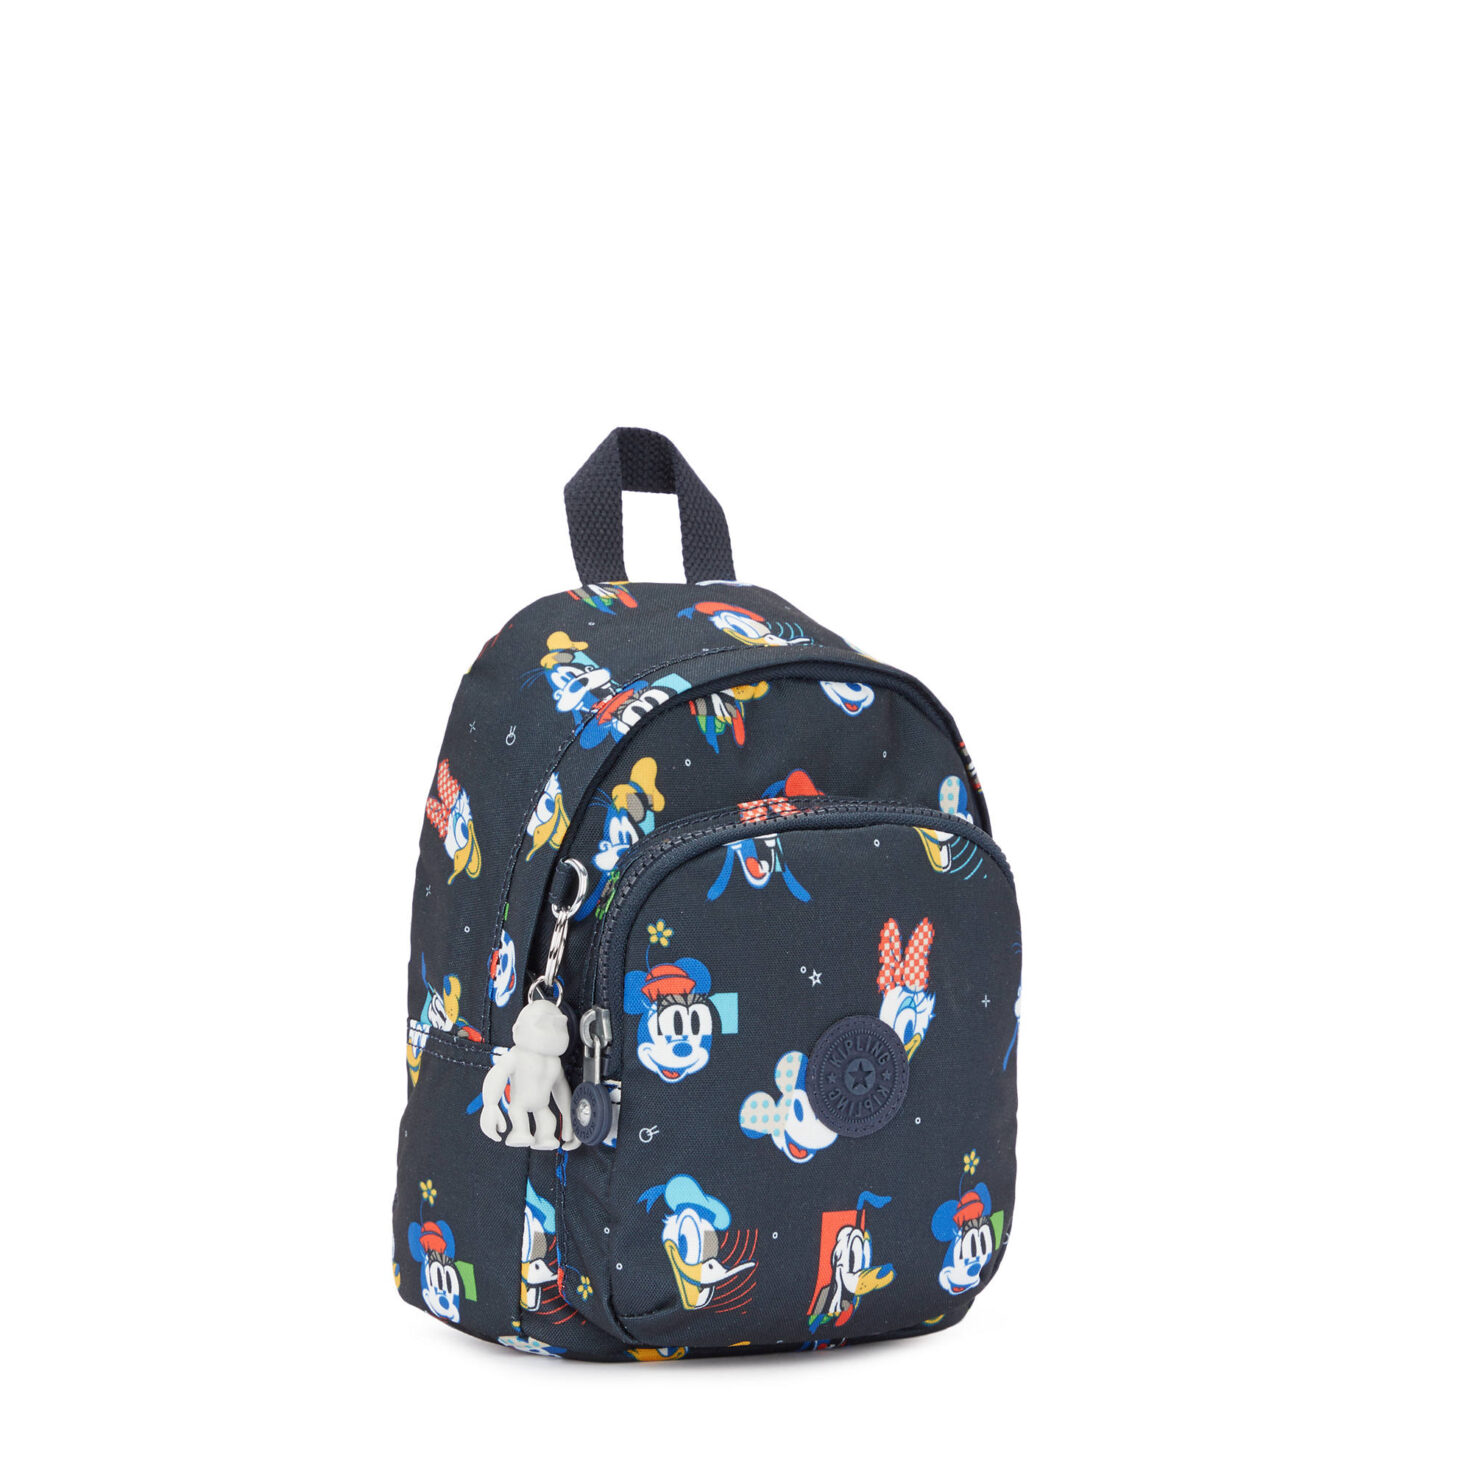 The Mickey And Friends Kipling Collection Has Sensational Style | Chip ...